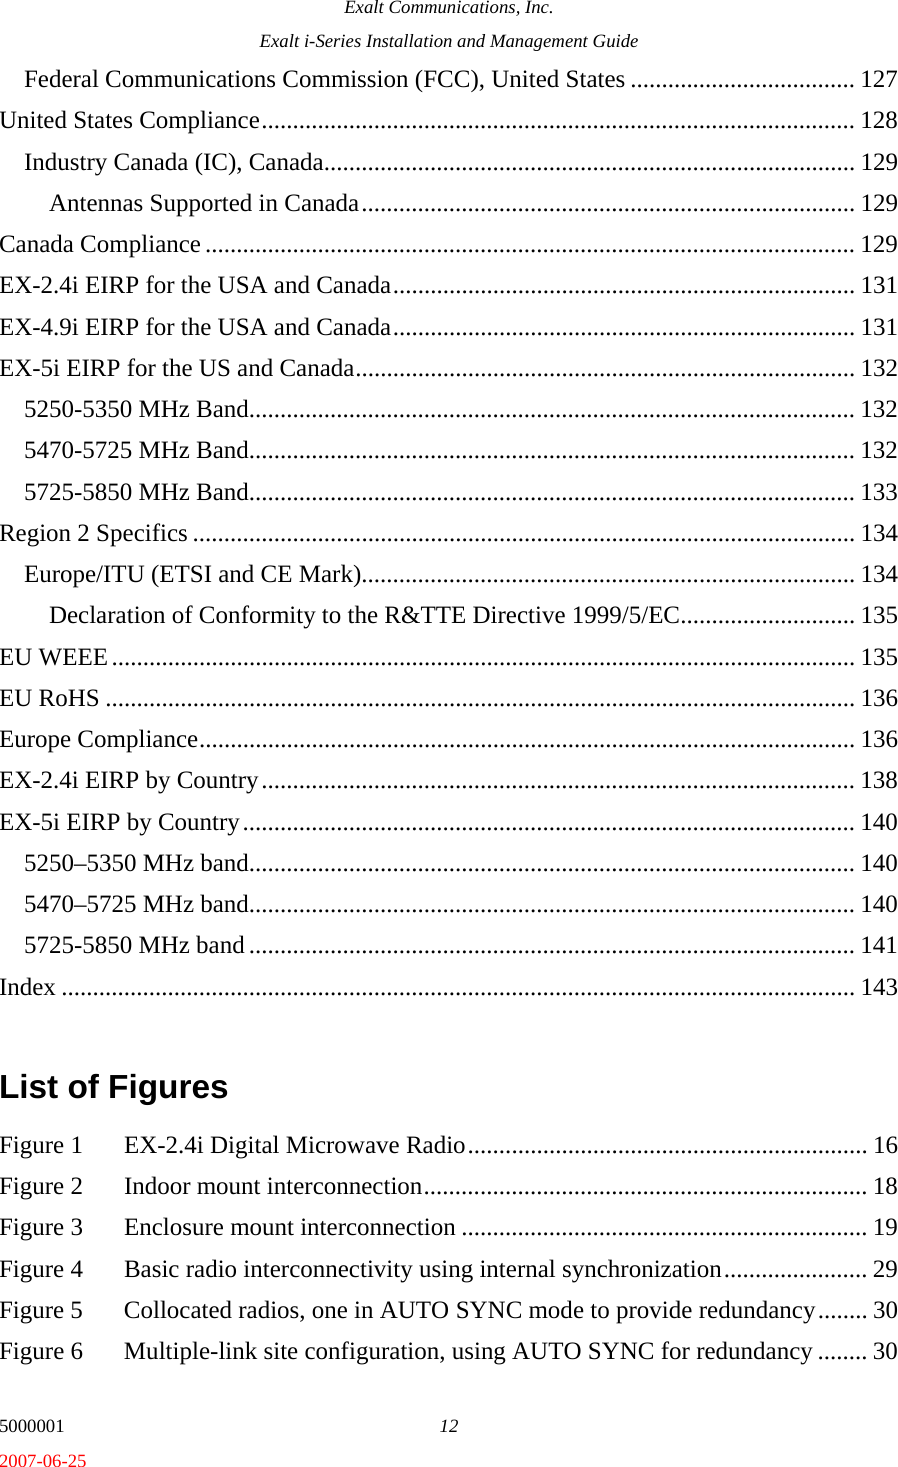 Exalt Communications, Inc. Exalt i-Series Installation and Management Guide 5000001  12 2007-06-25 Federal Communications Commission (FCC), United States .................................... 127 United States Compliance............................................................................................... 128 Industry Canada (IC), Canada..................................................................................... 129 Antennas Supported in Canada............................................................................... 129 Canada Compliance ........................................................................................................ 129 EX-2.4i EIRP for the USA and Canada.......................................................................... 131 EX-4.9i EIRP for the USA and Canada.......................................................................... 131 EX-5i EIRP for the US and Canada................................................................................ 132 5250-5350 MHz Band................................................................................................. 132 5470-5725 MHz Band................................................................................................. 132 5725-5850 MHz Band................................................................................................. 133 Region 2 Specifics .......................................................................................................... 134 Europe/ITU (ETSI and CE Mark)............................................................................... 134 Declaration of Conformity to the R&amp;TTE Directive 1999/5/EC............................ 135 EU WEEE....................................................................................................................... 135 EU RoHS ........................................................................................................................ 136 Europe Compliance......................................................................................................... 136 EX-2.4i EIRP by Country............................................................................................... 138 EX-5i EIRP by Country.................................................................................................. 140 5250–5350 MHz band................................................................................................. 140 5470–5725 MHz band................................................................................................. 140 5725-5850 MHz band ................................................................................................. 141 Index ............................................................................................................................... 143  List of Figures  Figure 1  EX-2.4i Digital Microwave Radio................................................................ 16 Figure 2  Indoor mount interconnection....................................................................... 18 Figure 3  Enclosure mount interconnection ................................................................. 19 Figure 4  Basic radio interconnectivity using internal synchronization....................... 29 Figure 5  Collocated radios, one in AUTO SYNC mode to provide redundancy........ 30 Figure 6  Multiple-link site configuration, using AUTO SYNC for redundancy ........ 30 